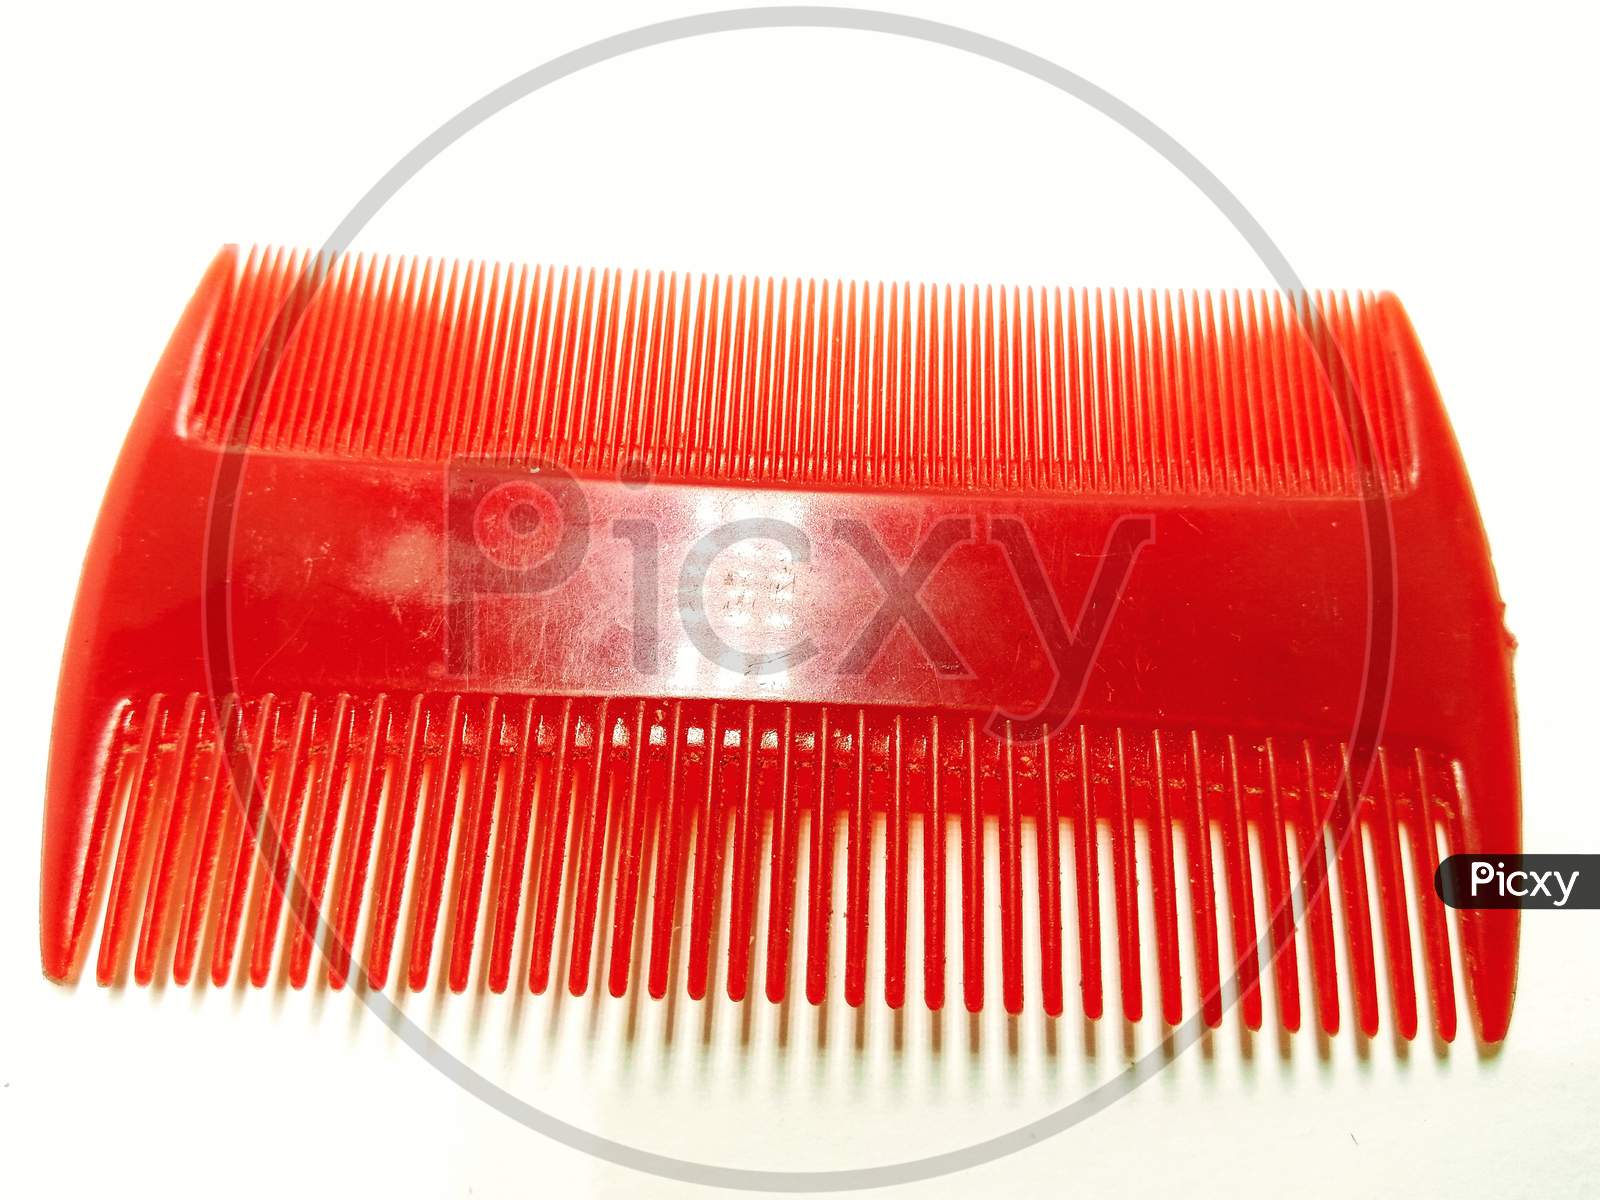 Plastic Comb Over an Isolated White Background